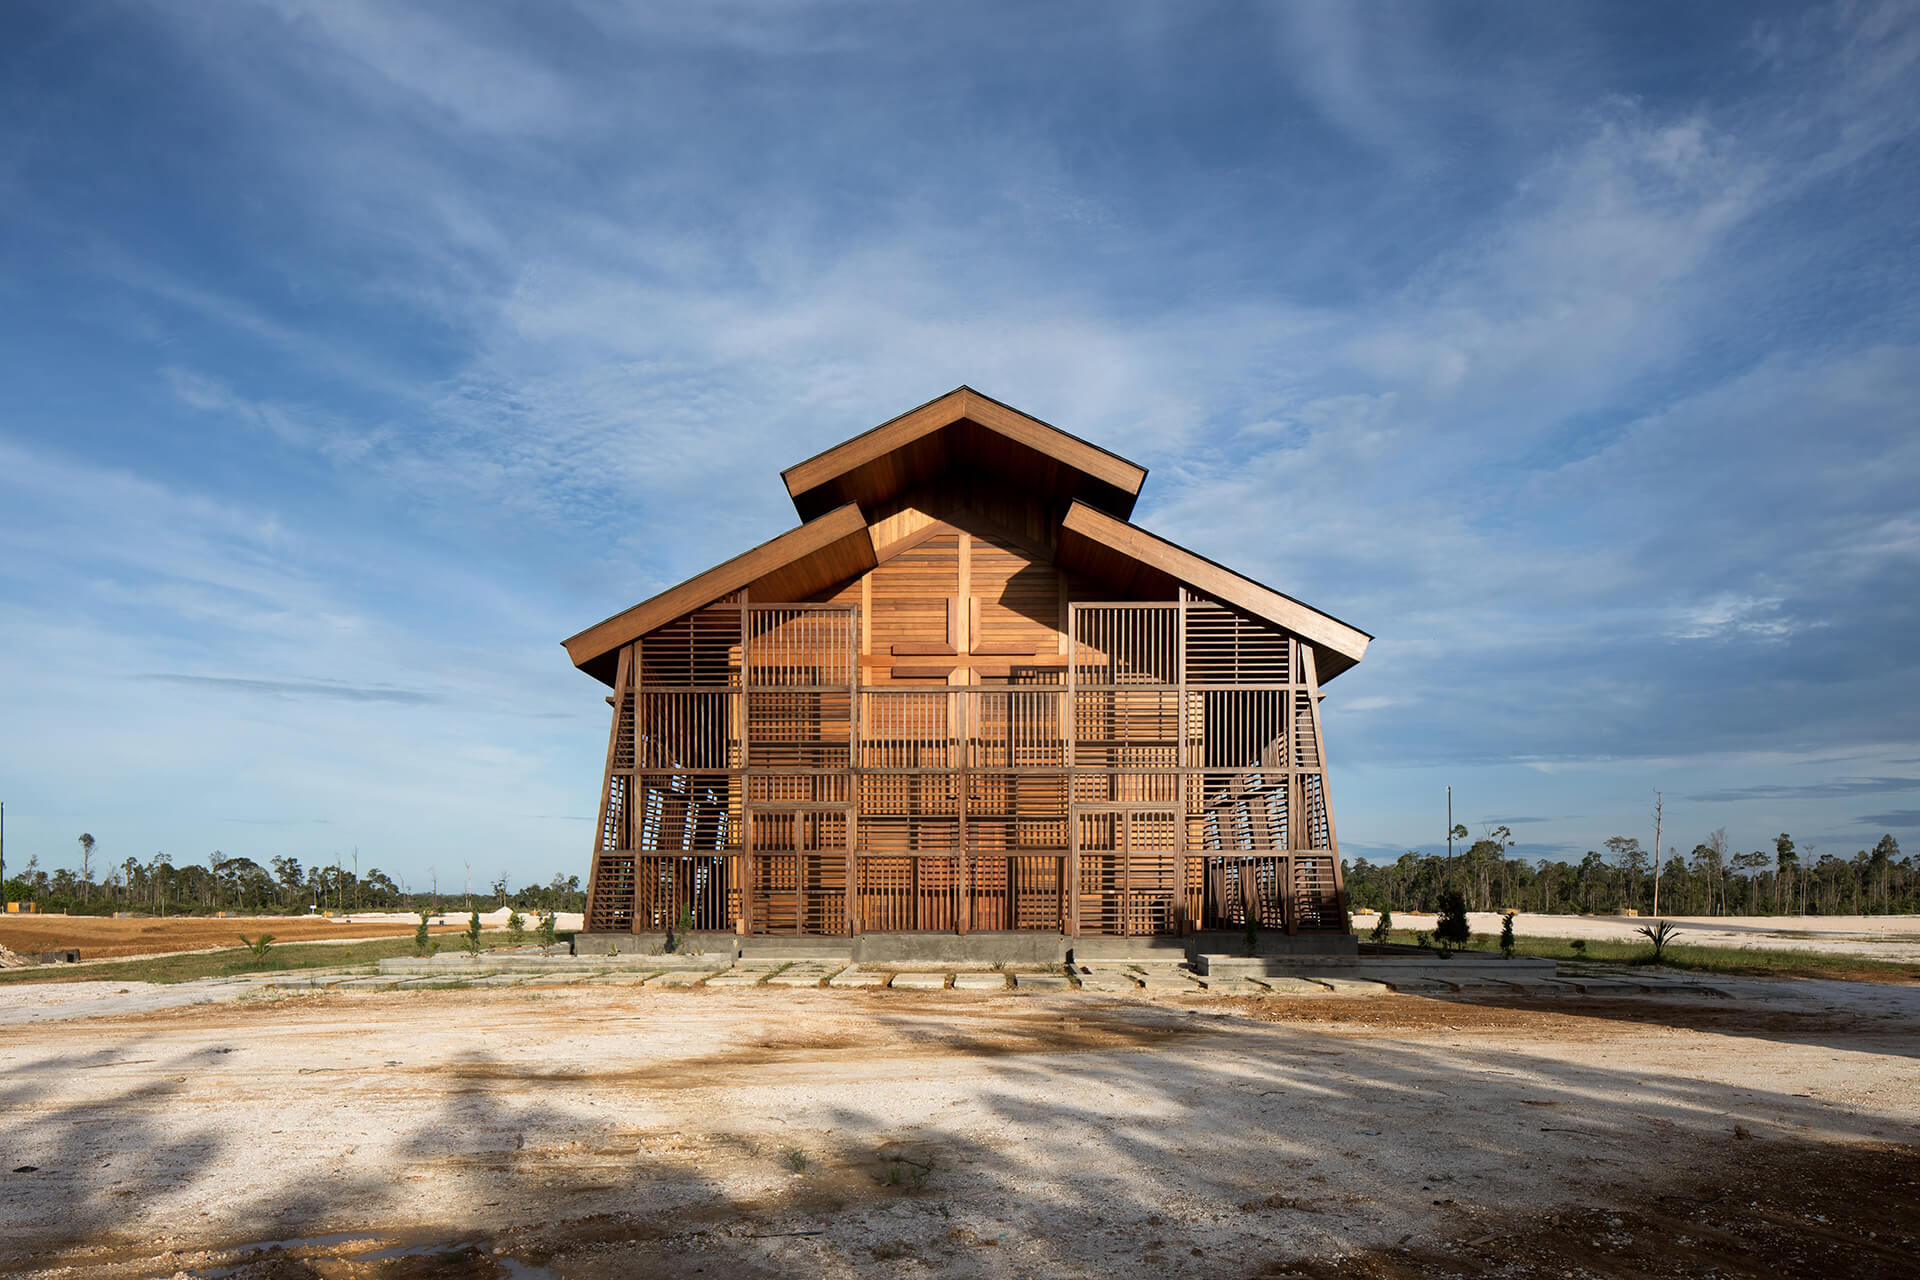 TSDS Interior Architects  Chooses Timber To Complete The Construction of Oikumene Church in Indonesia